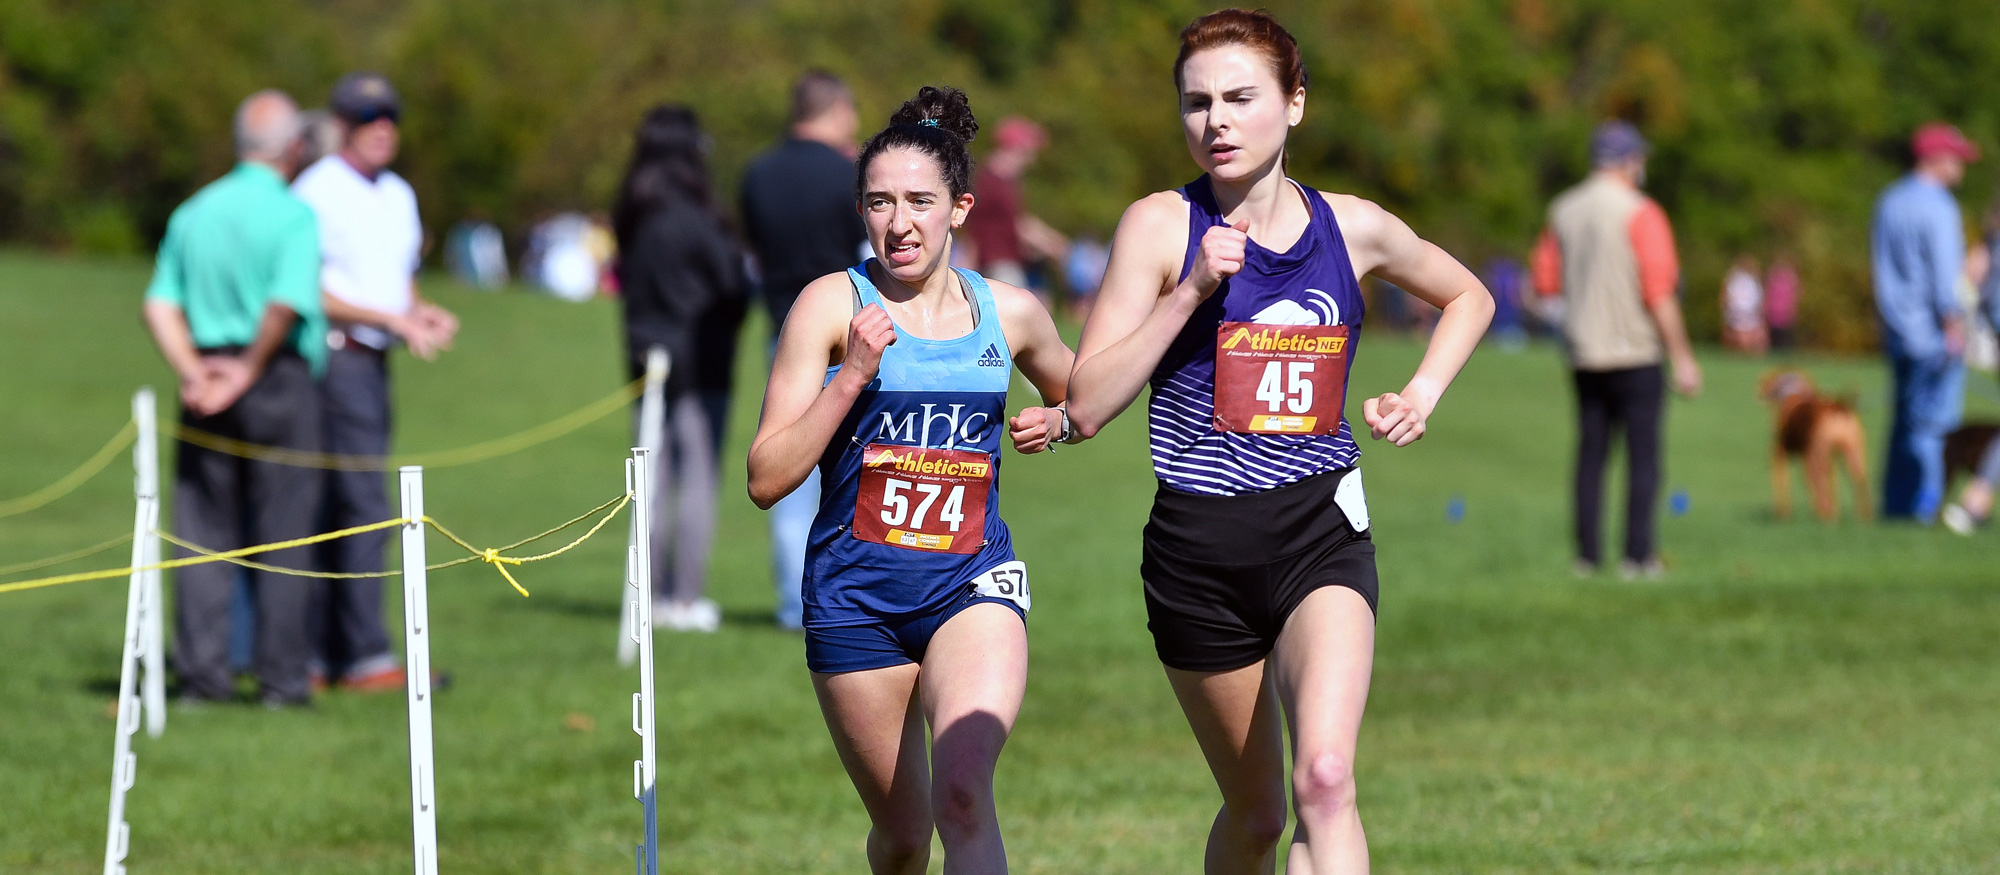 Lauren Selkin won her second career NCAA All-Region honors in cross country after placing ninth overall at the NCAA Mideast Regional Championships on Nov. 12, 2022, in Canton, N.Y. (RJB Sports file photo)